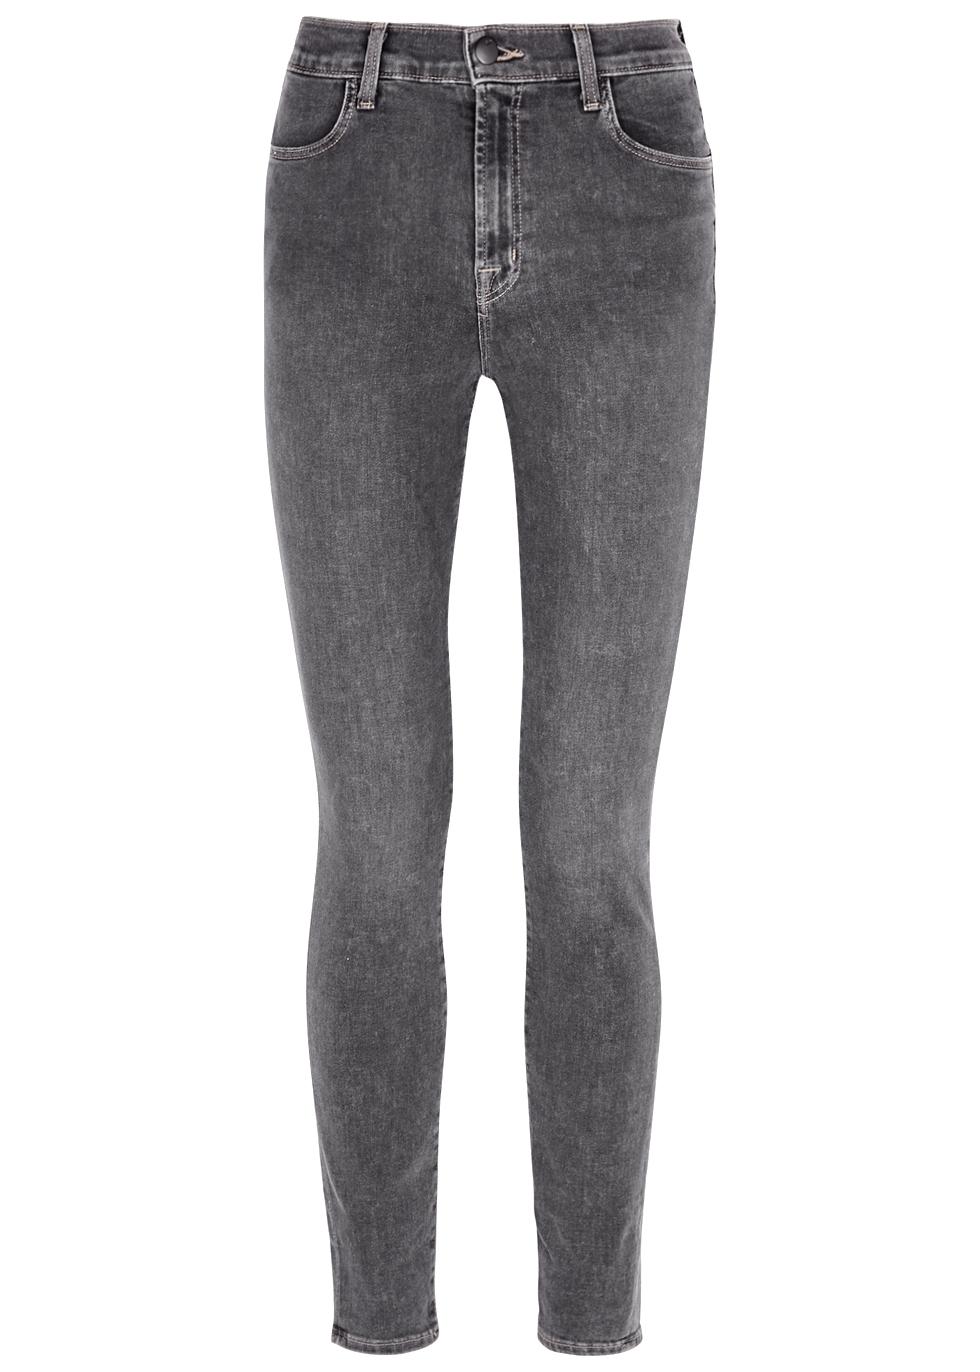 J Brand Maria Grey High-rise Skinny Jeans in Gray | Lyst